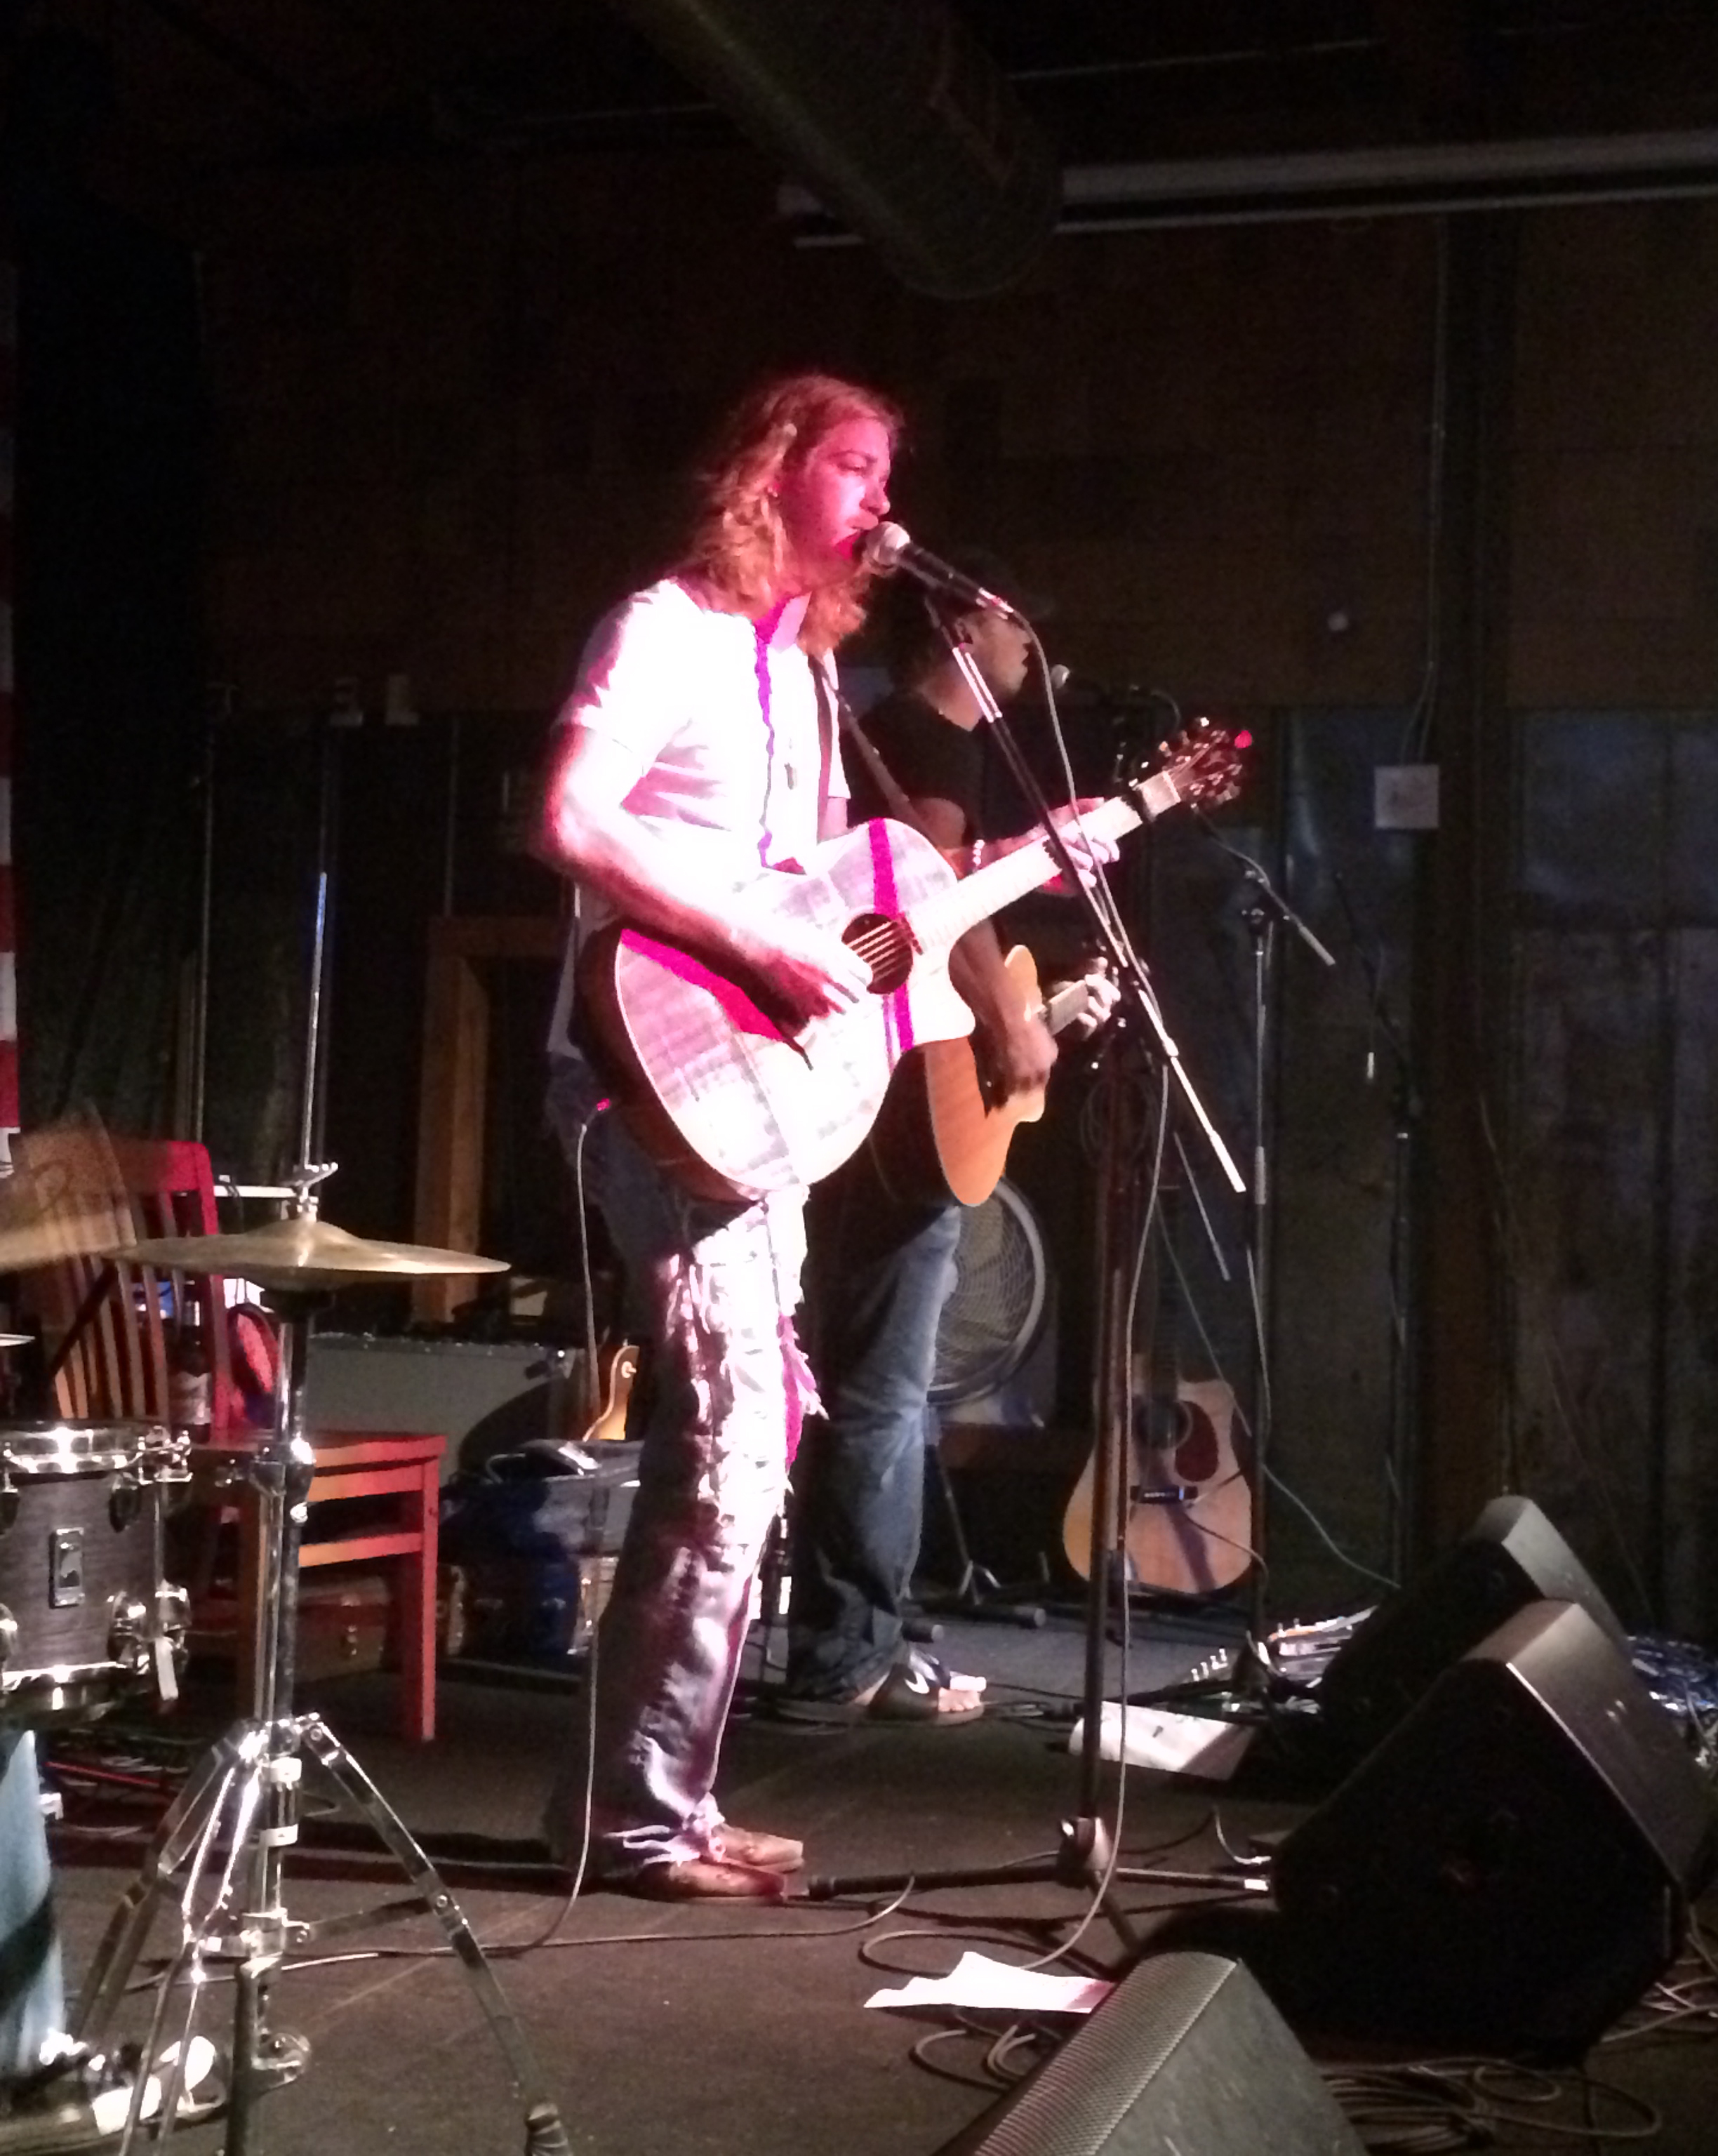 My up close view of Bucky Covington on Friday night.